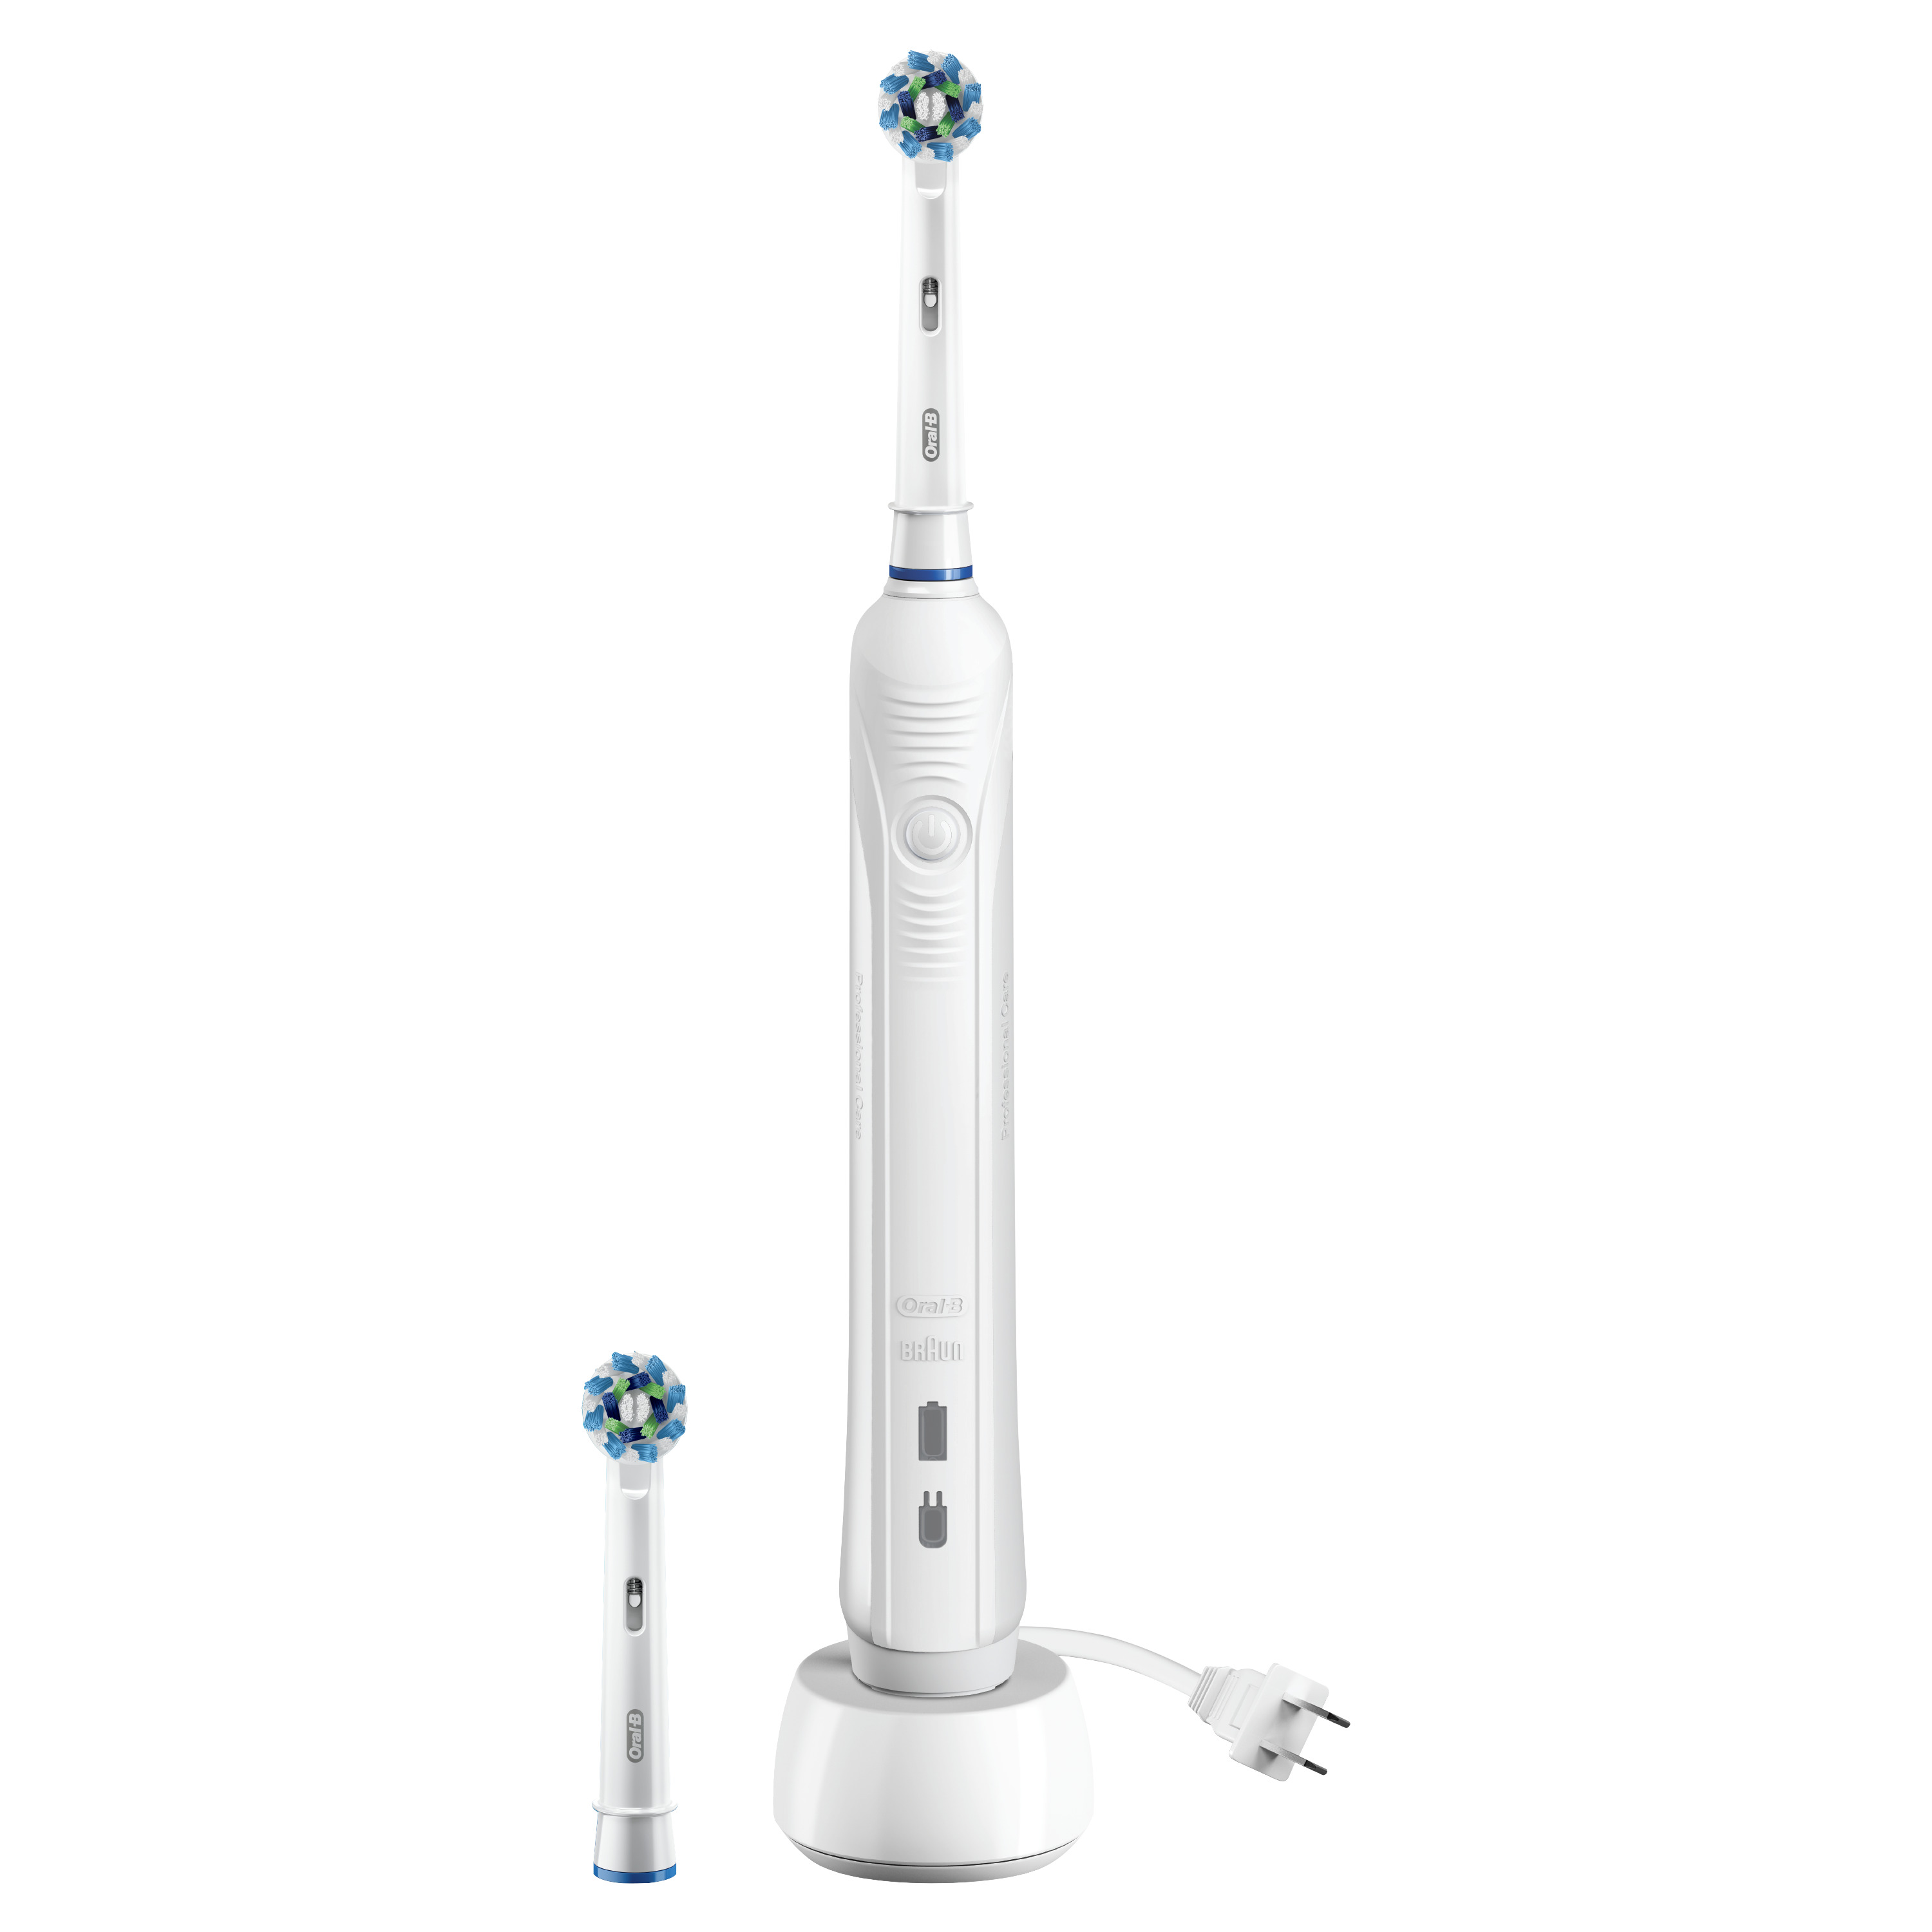 Oral-B 1000 (with Bonus Refill) CrossAction Electric Toothbrush, White, Powered by Braun, 2 Replacem - image 1 of 12